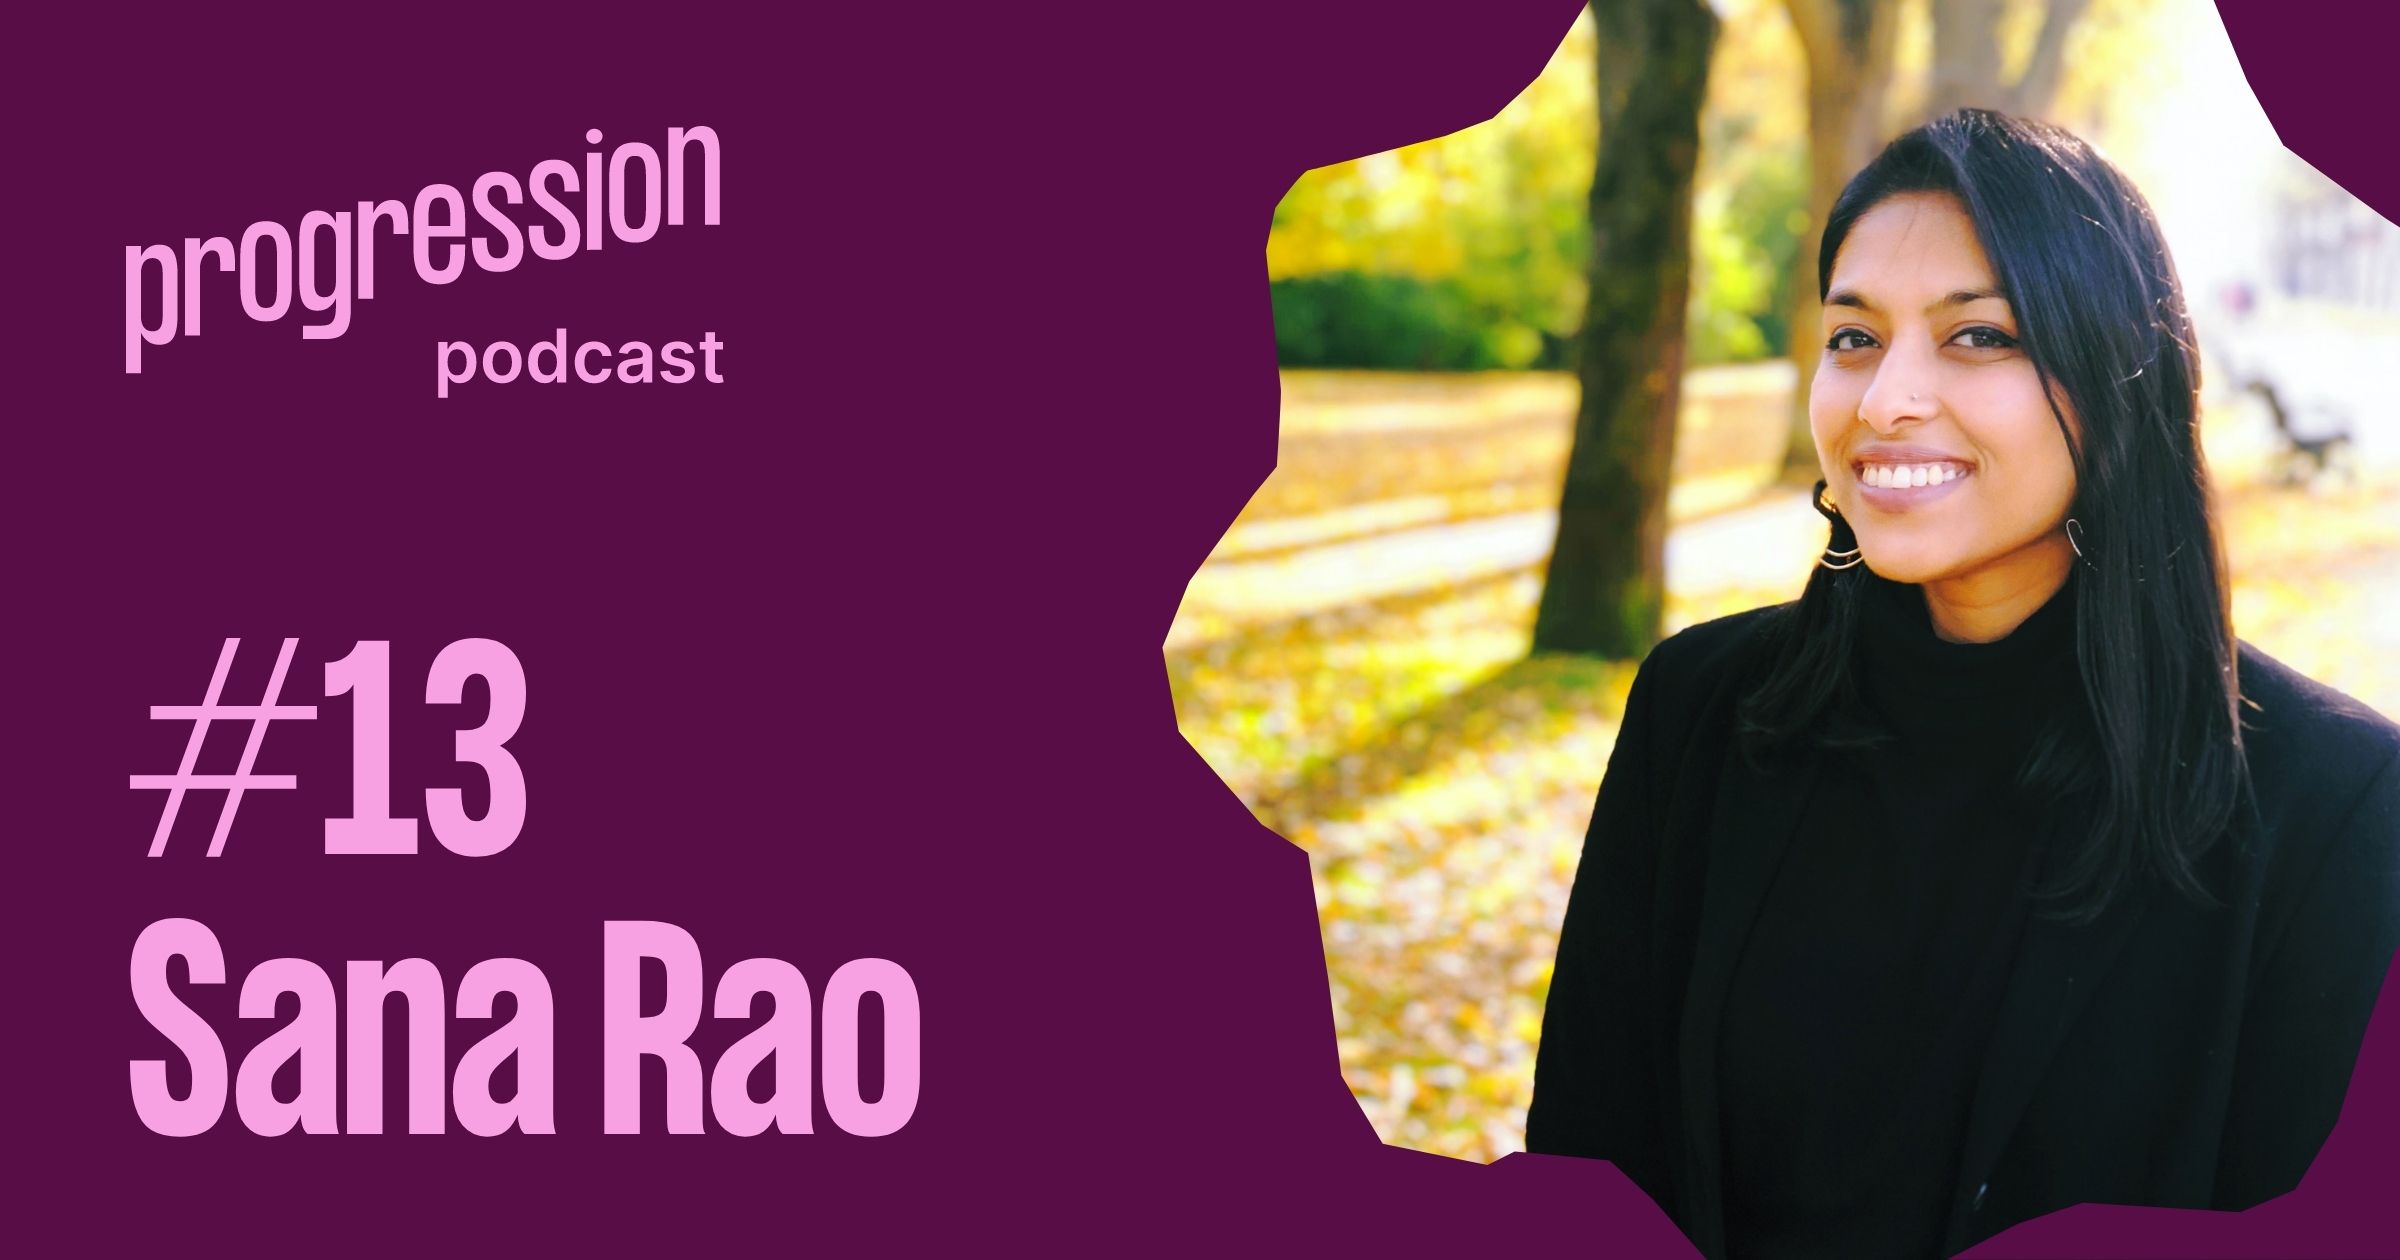 Podcast #13: Sana Rao (Twitter, Deliveroo) on life changes, sponsorship and scaling design teams through change